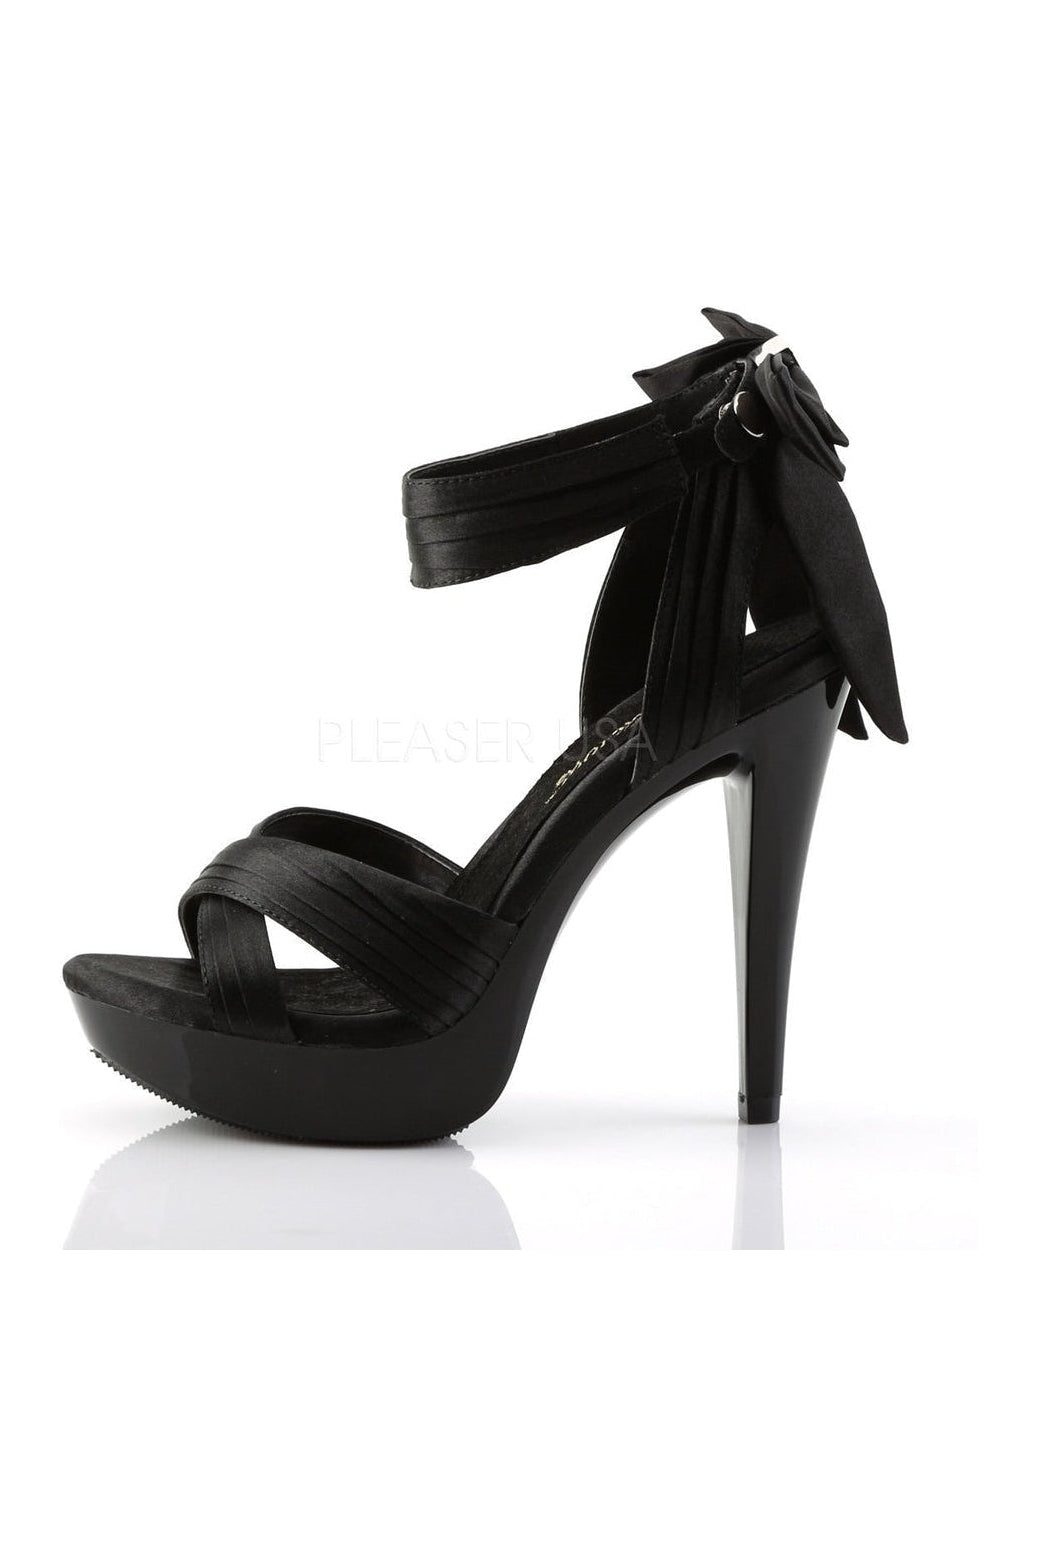 COCKTAIL-568 Sandal | Black Fabric-Fabulicious-Sandals-SEXYSHOES.COM